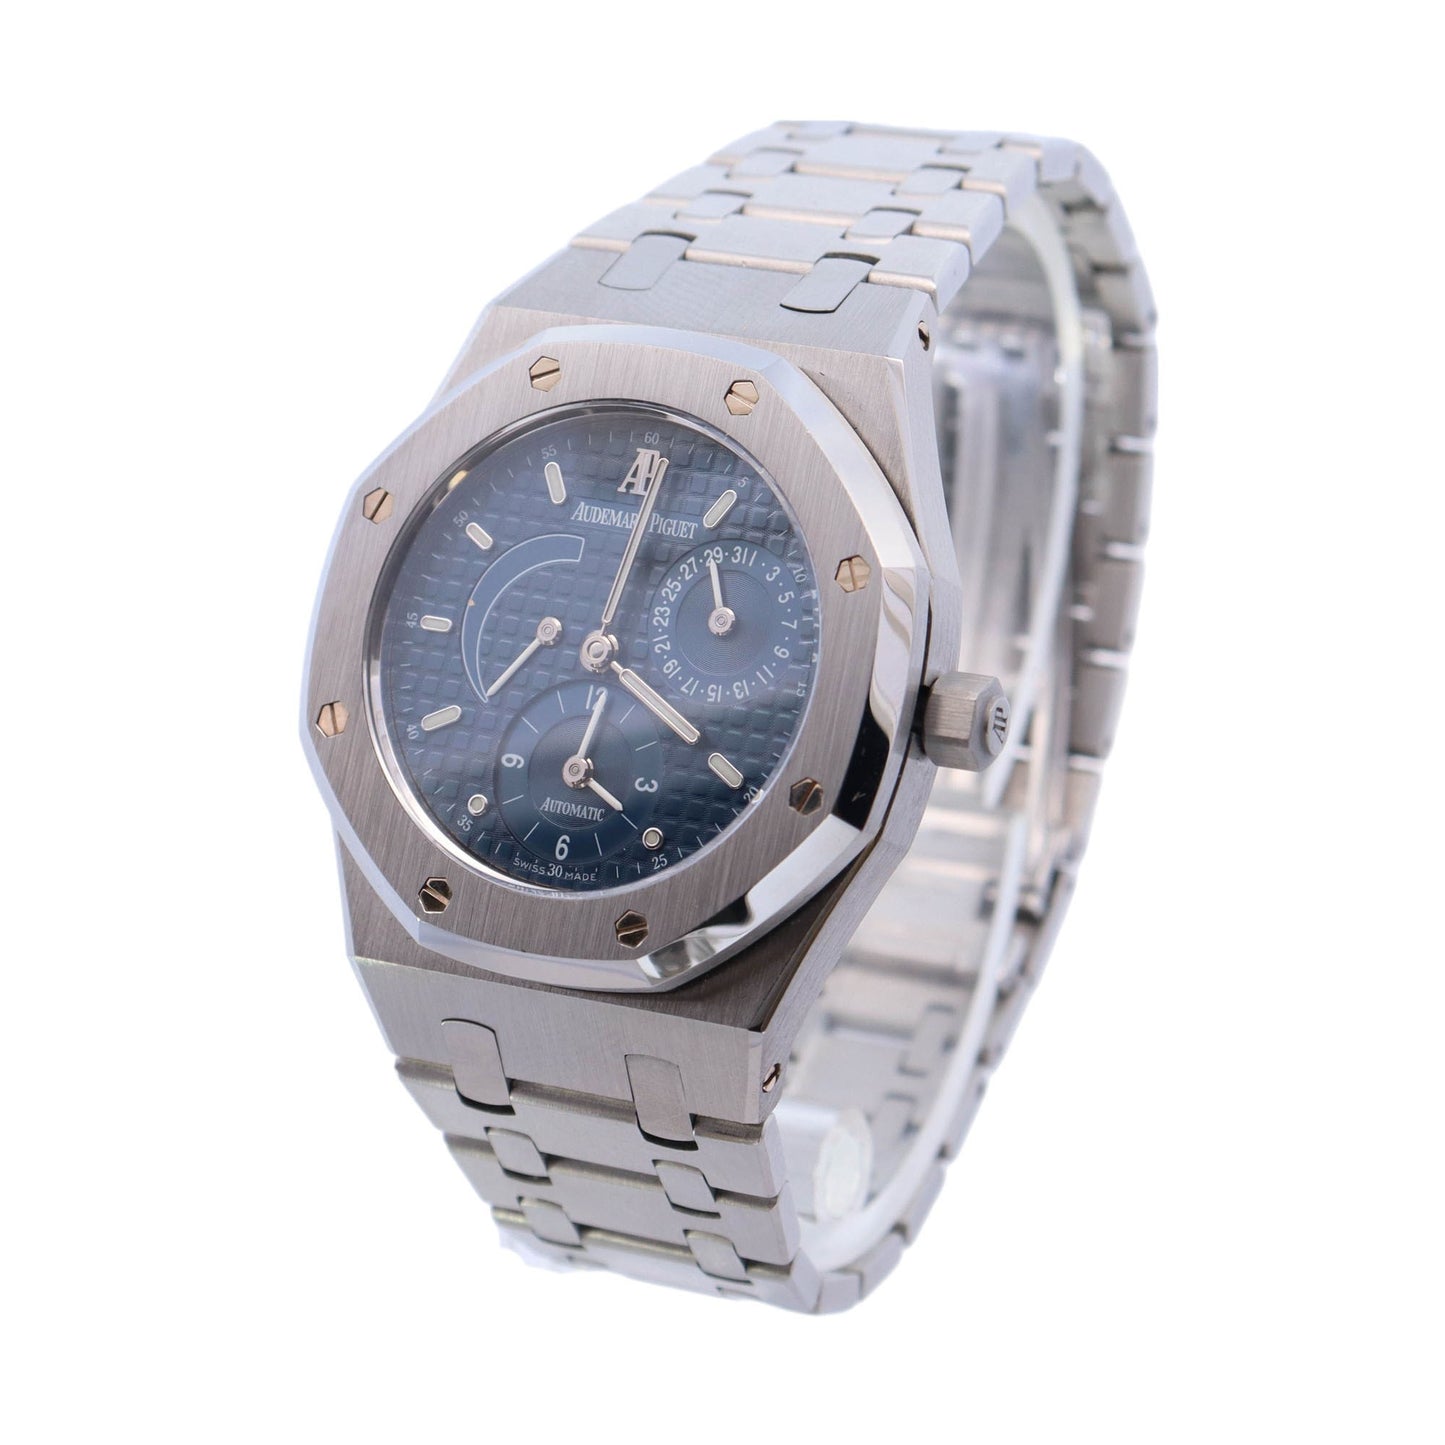 Audemars Piguet Royal Oak Dual Time Stainless Steel 39mm Blue Stick Dial Watch Reference# 25730ST - Happy Jewelers Fine Jewelry Lifetime Warranty